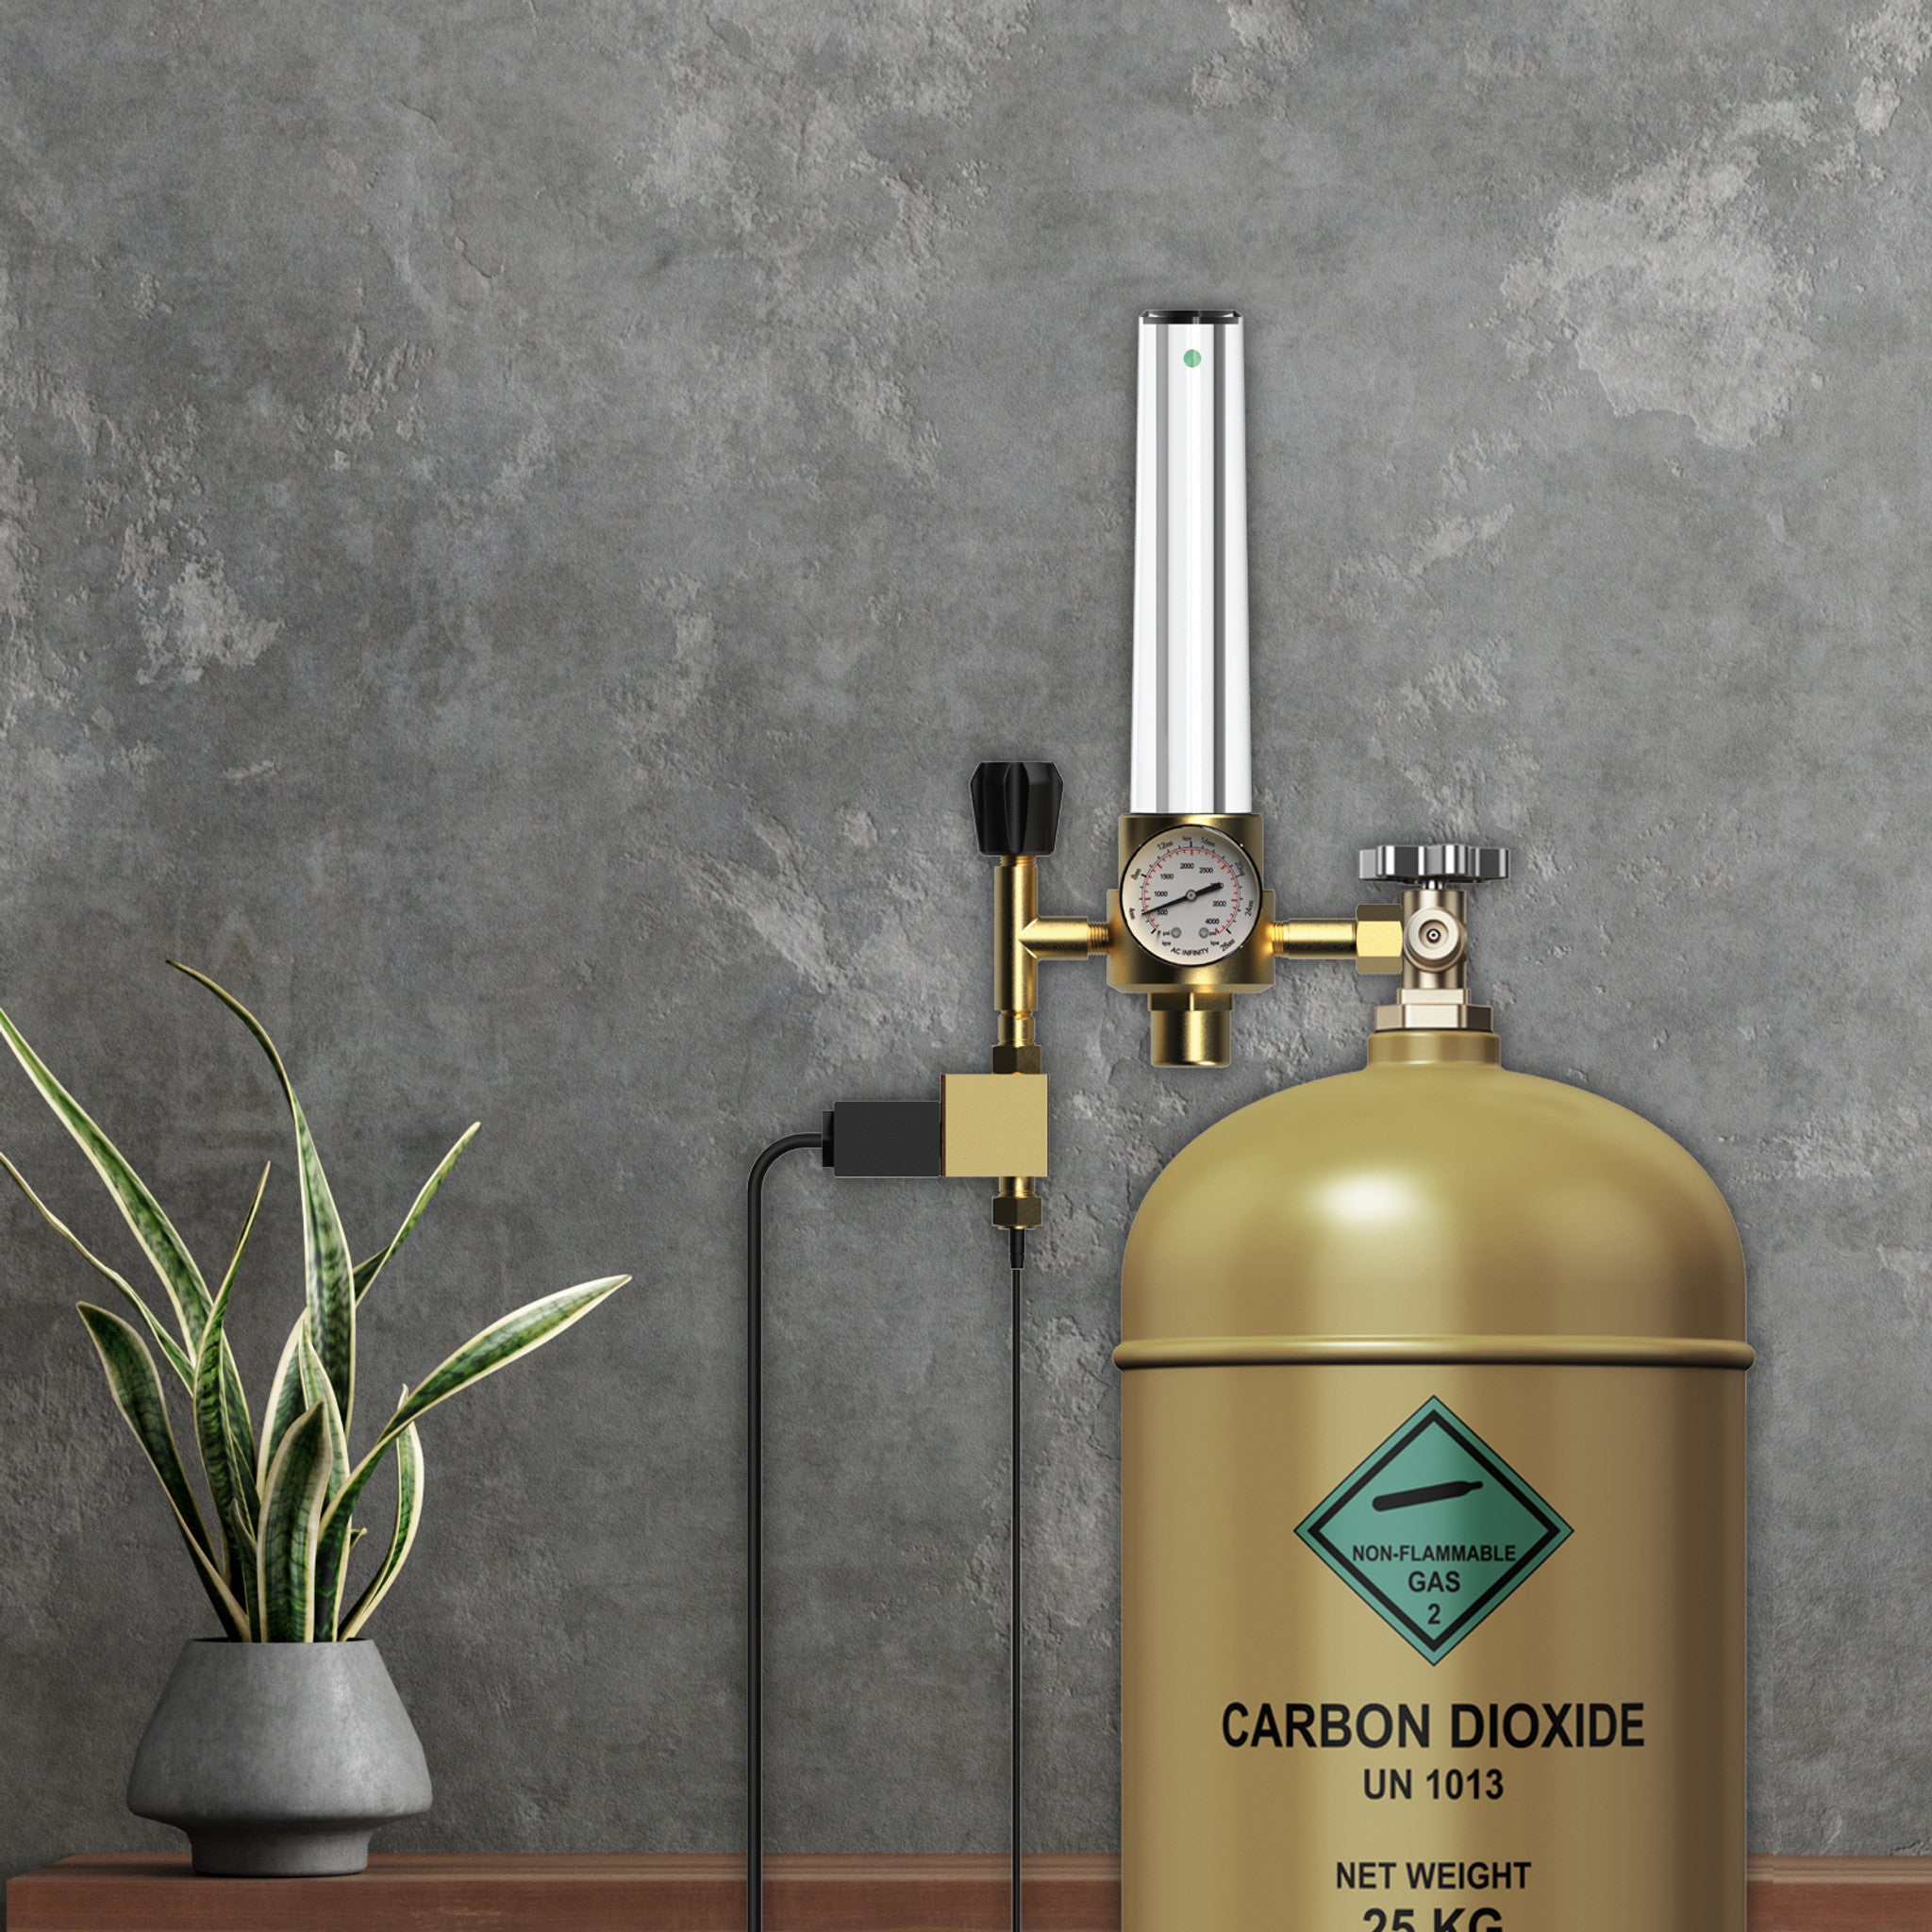 Product Image:AC INFINITY CO2 REGULATOR, CARBON DIOXIDE MONITOR WITH SOLENOID VALVE AND GAS FLOW METER